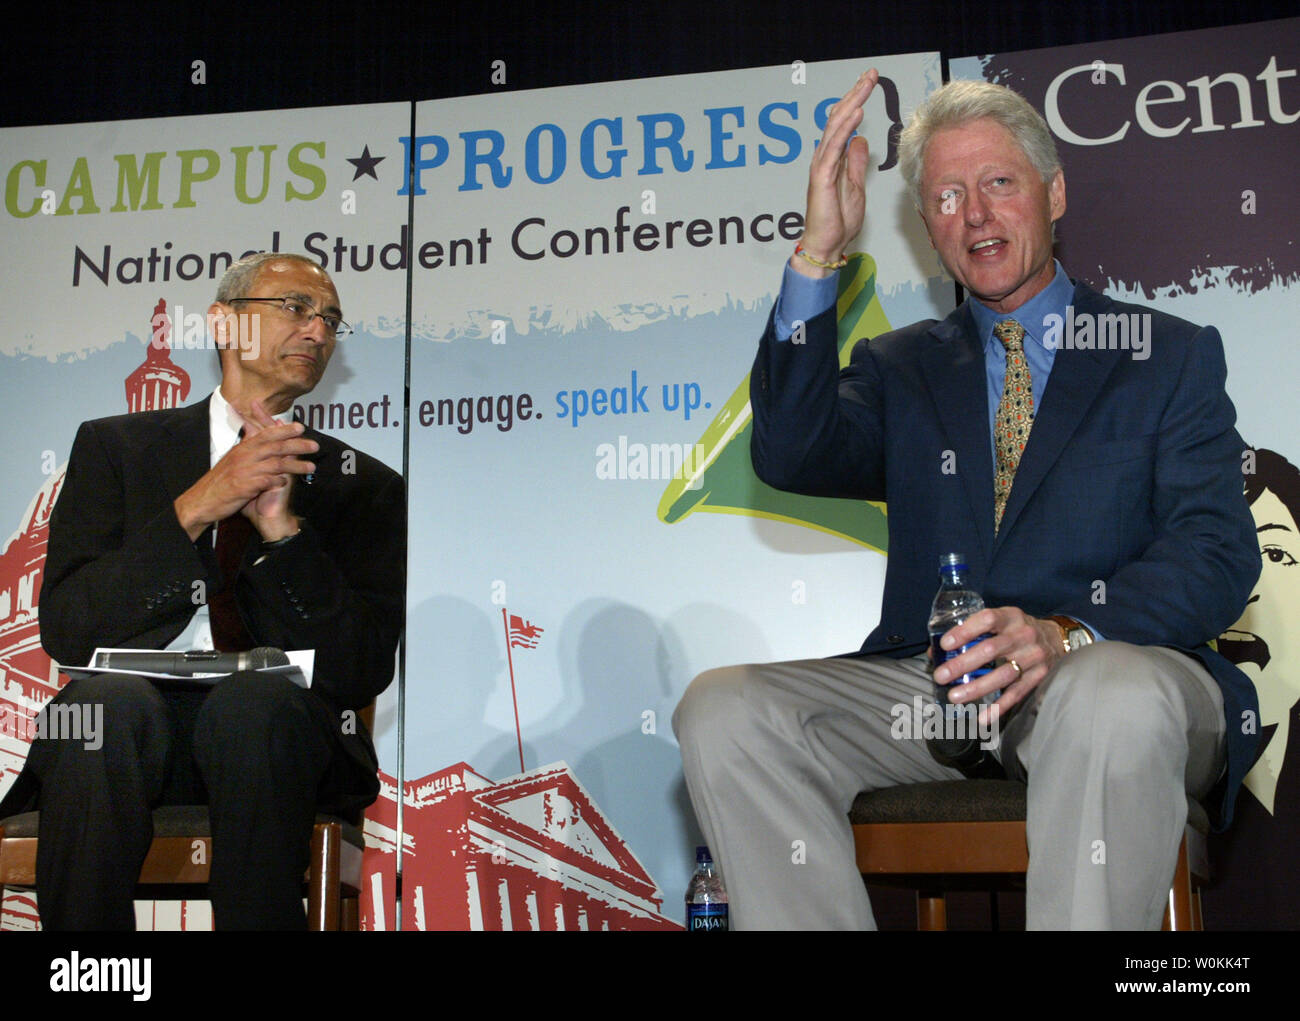 John Podesta, president and CEO of the Center for American Progress, (L) applauds former U.S. President Bill Clinton at the Progress National Student Conference in Washington, July 13, 2005. (UPI Photo/Yuri Gripas) Stock Photo